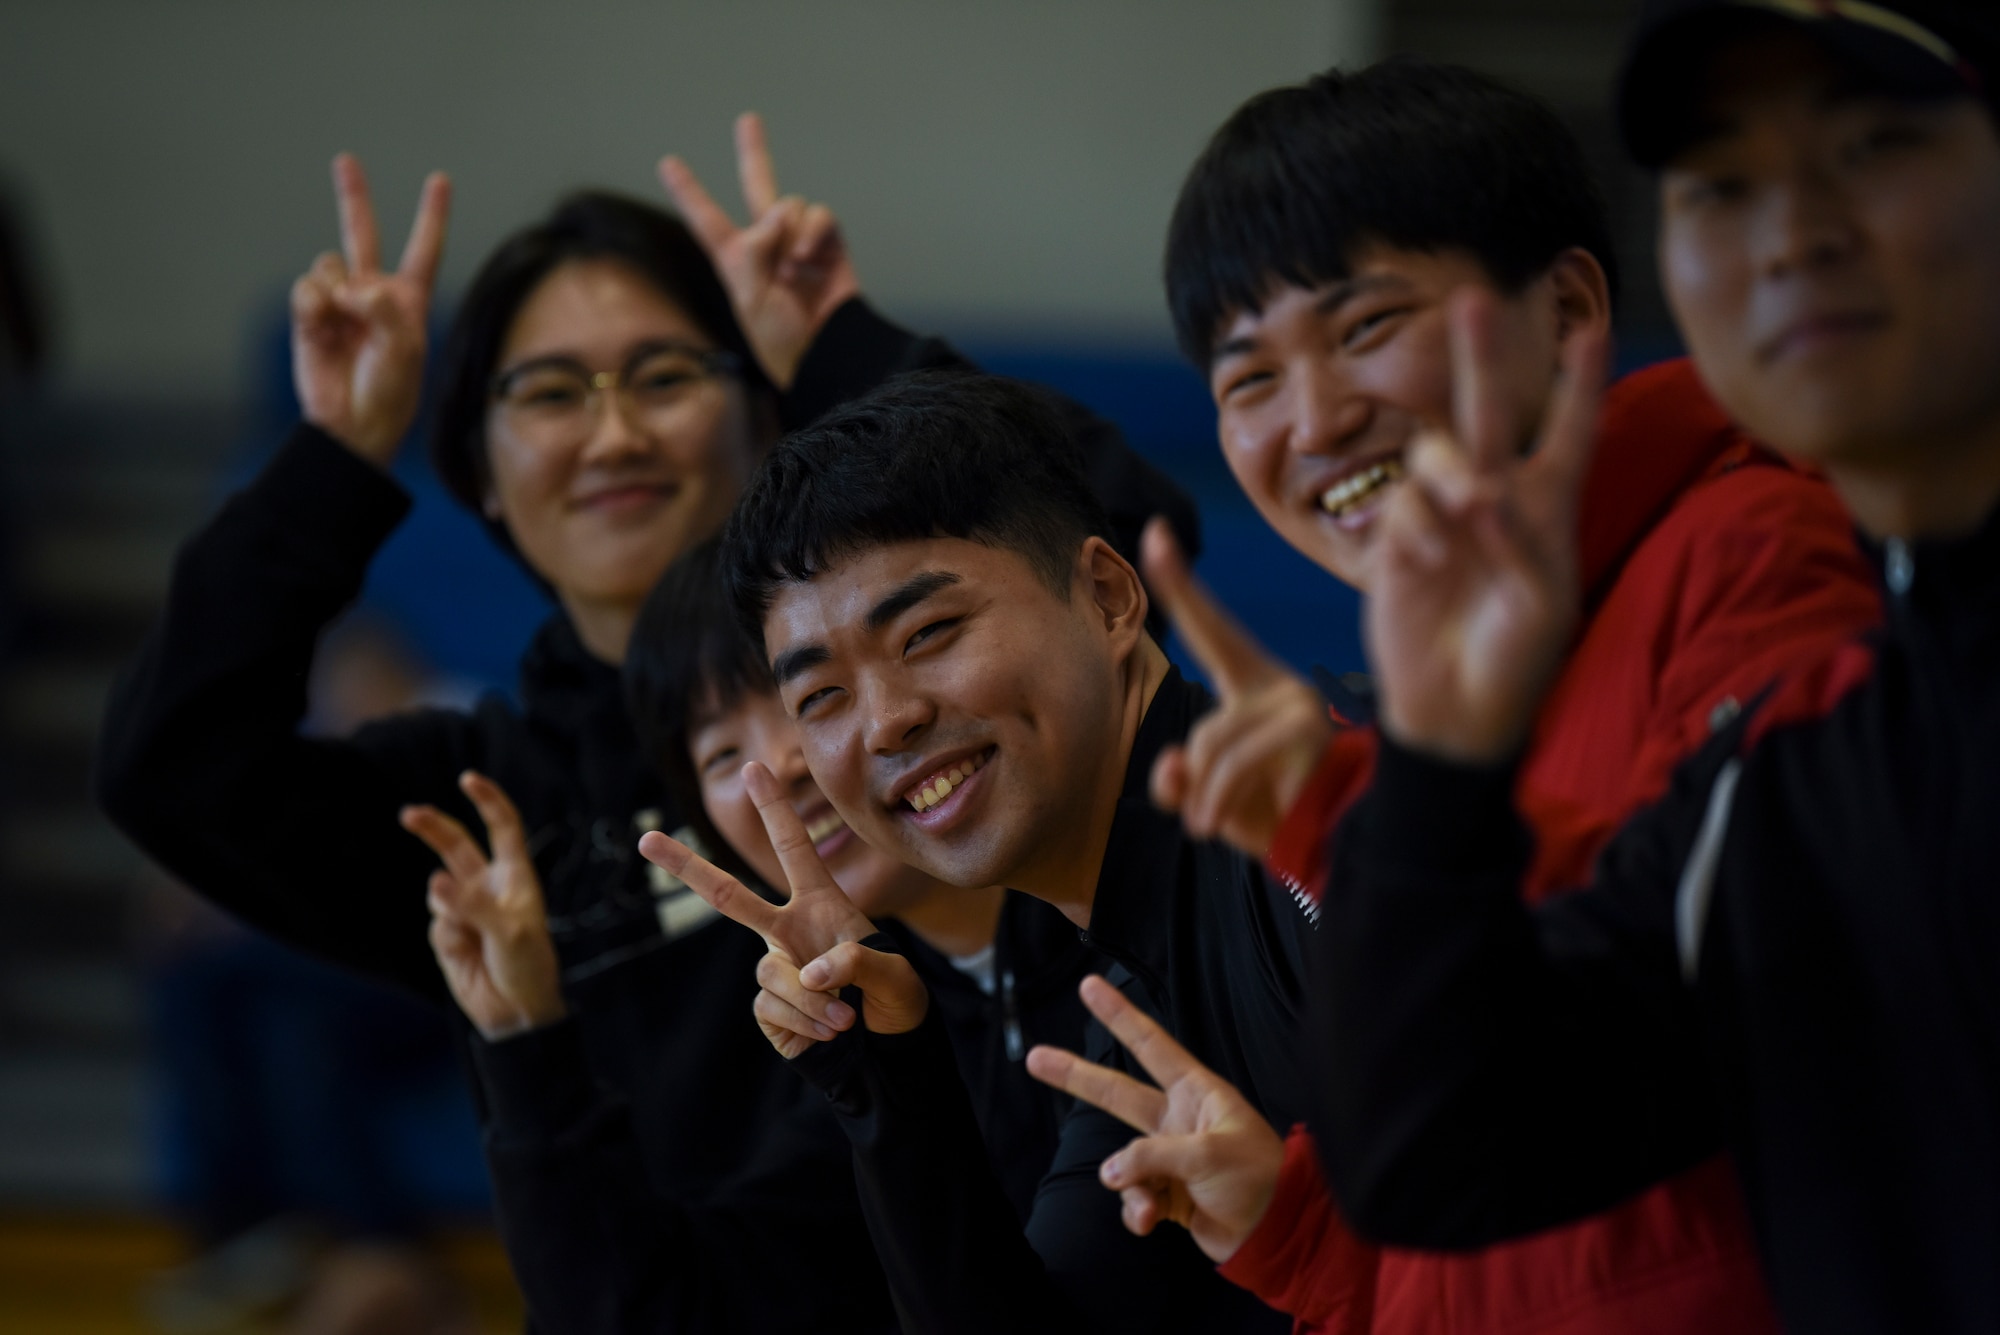 Republic of Korea Air Force 38th Fighter Group members cheer on athletes during the 2018 US-ROKAF Friendship Day at Kunsan Air Base, Republic of Korea, Nov. 9, 2018. The US-ROKAF Friendship Day focused on celebrating the partnership and alliance between the 8th Fighter Wing and 38th Fighter Group, who participated in several events throughout the day. (U.S. Air Force photo by Senior Airman Savannah L. Waters)